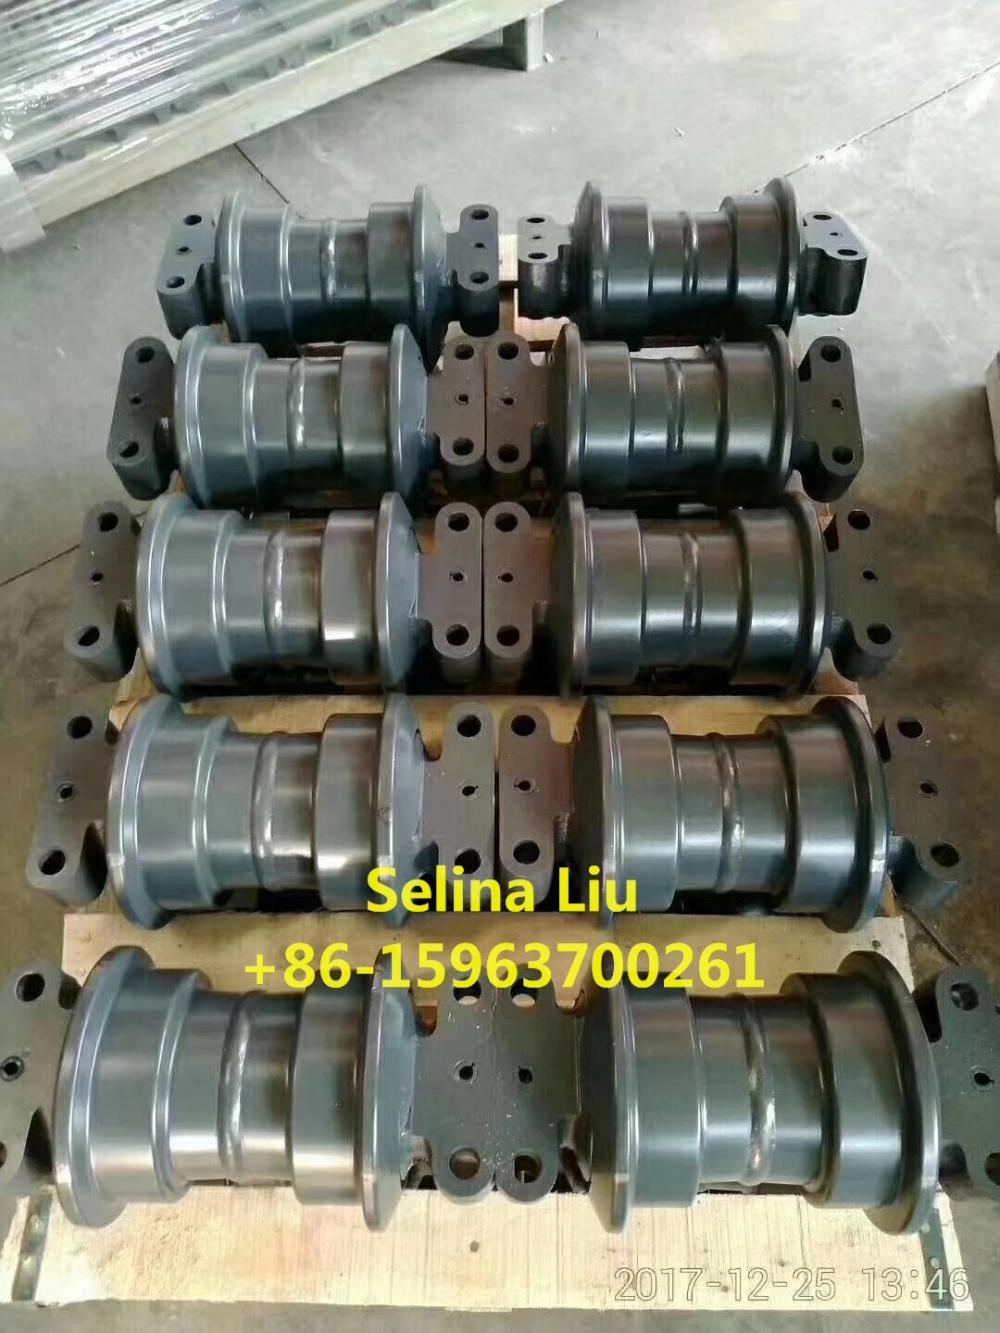 PC200-7 TRACK ROLLER ASS'Y 20Y-30-00016